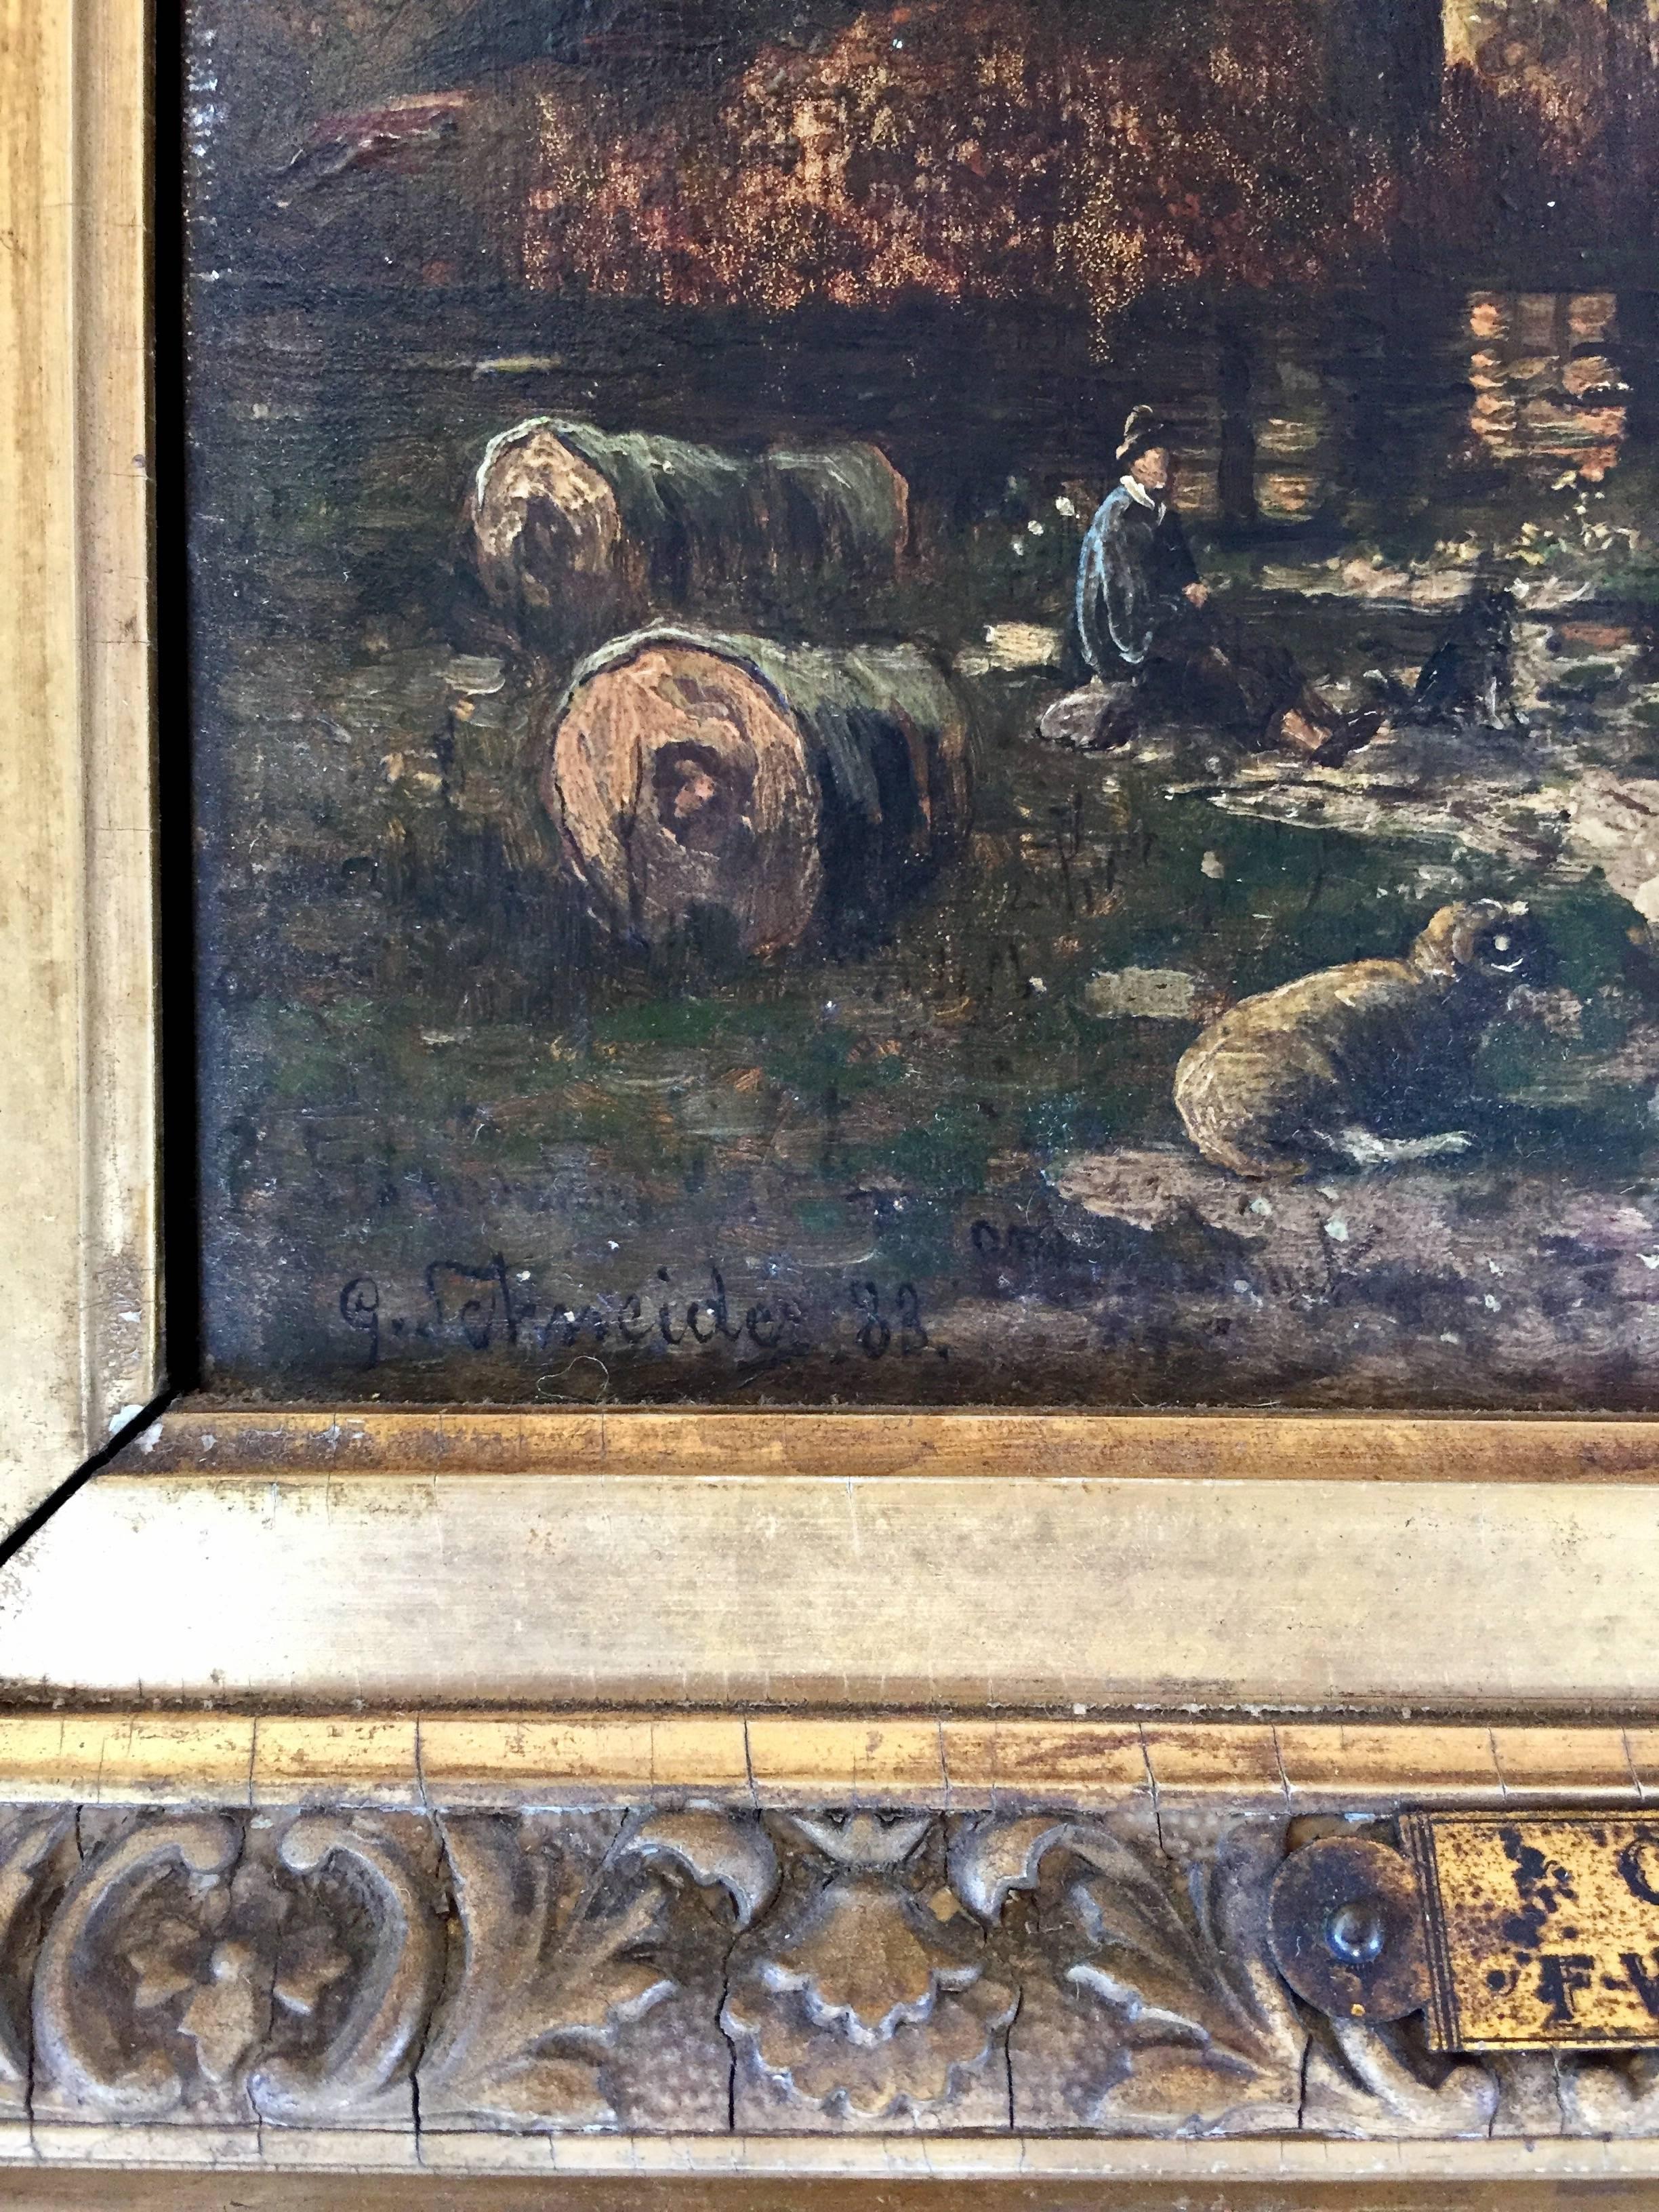 Great little painting in original frame, signed and dated '83 lower left.

Franz van Severdonck (1809-1889) 

The Belgian painter Franz van Severdonck was born in Brussels, where he lived and worked all his life. It is not yet known, where the